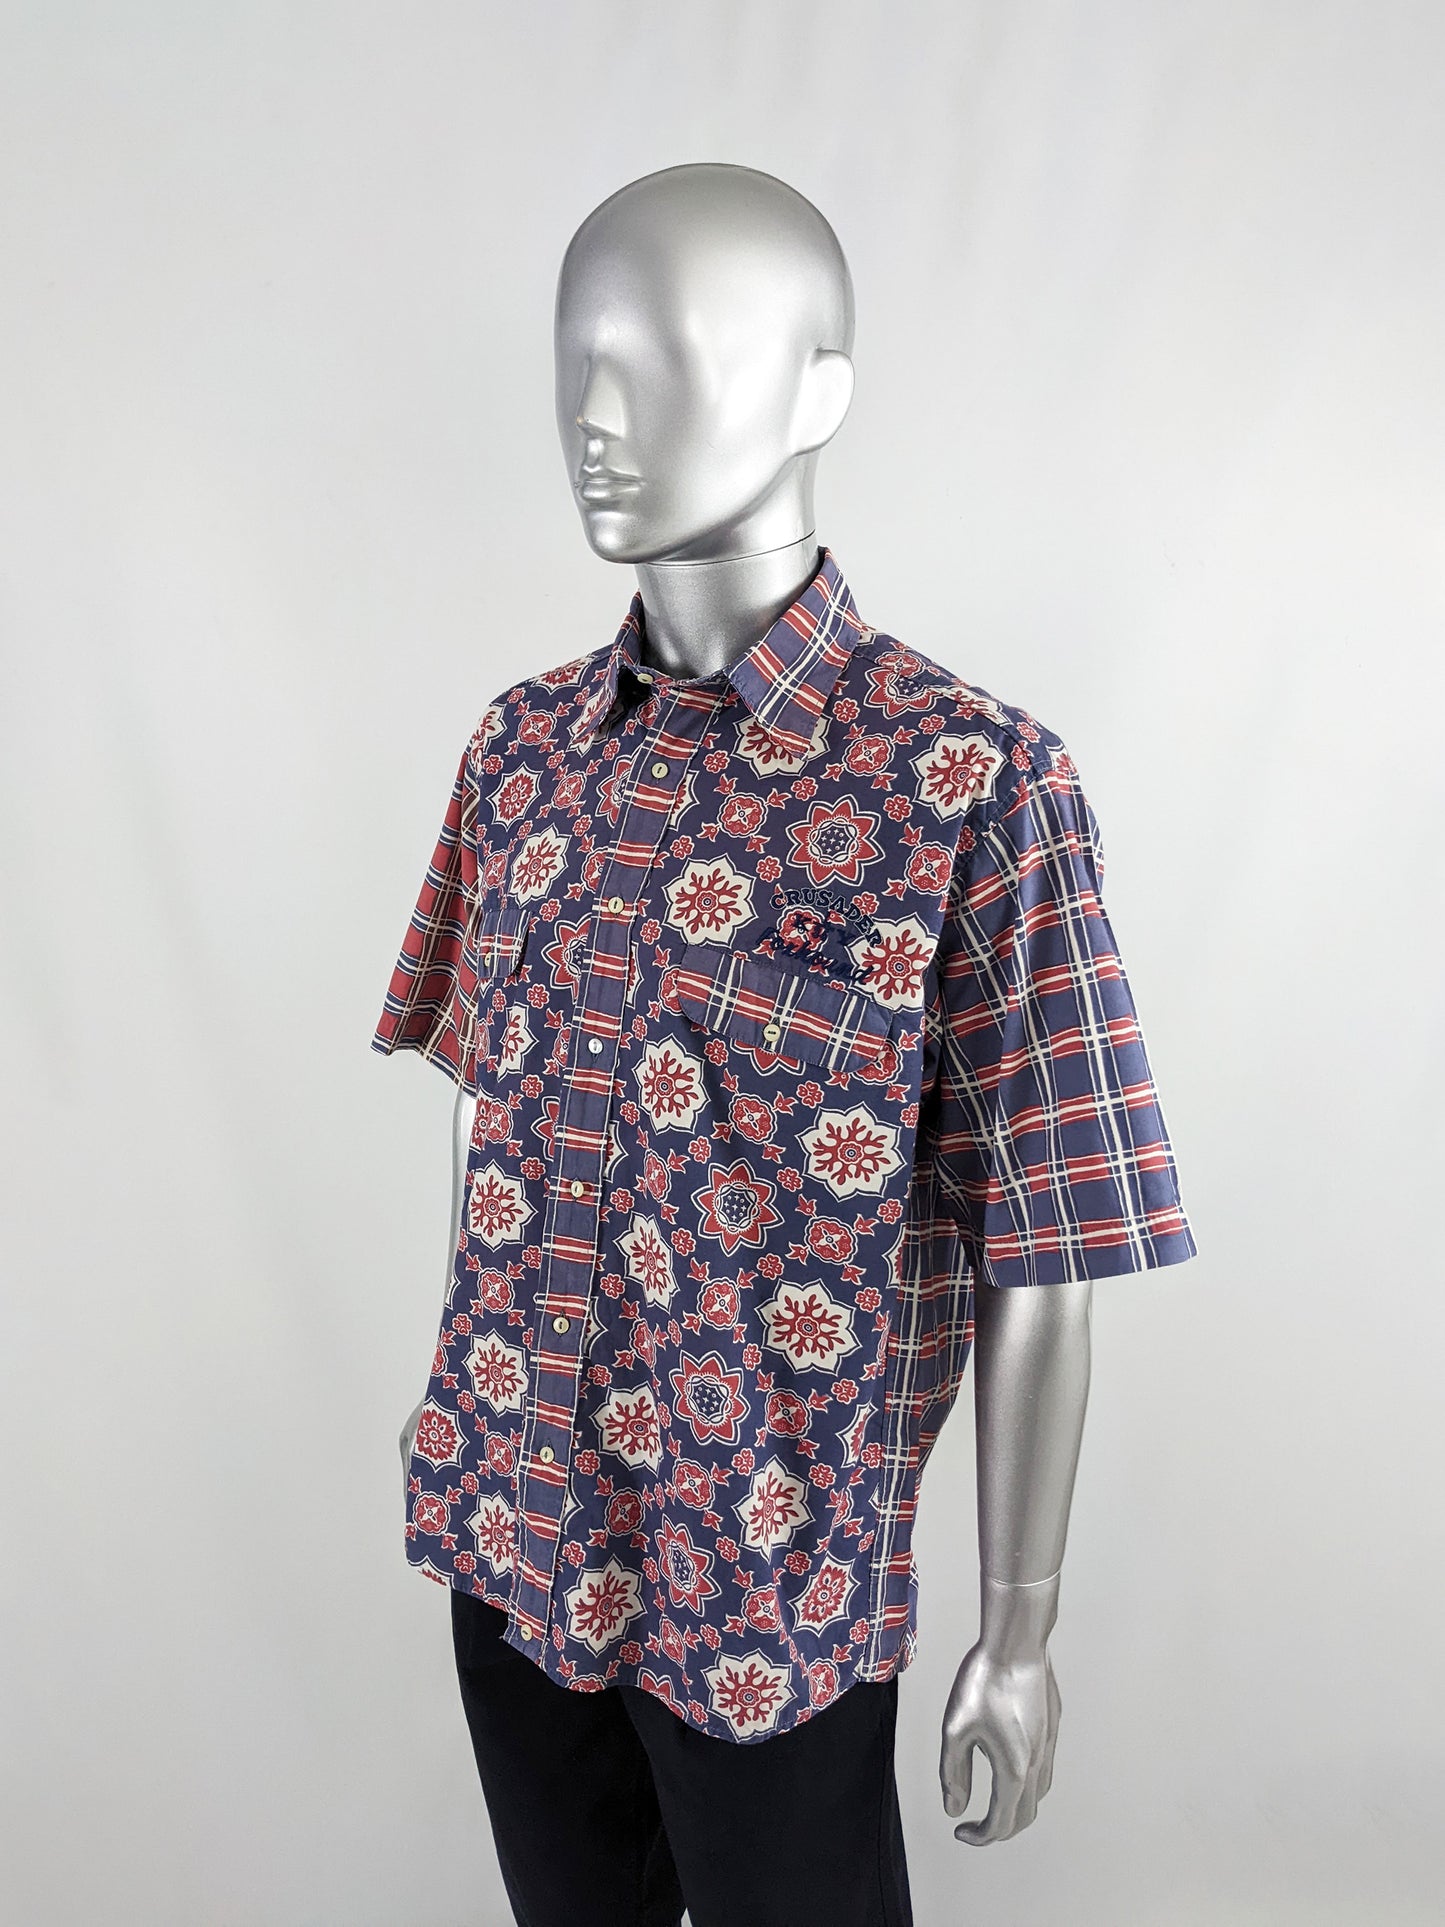 Foxhound Vintage Mens Blue & Red Patterned Shirt, 1980s